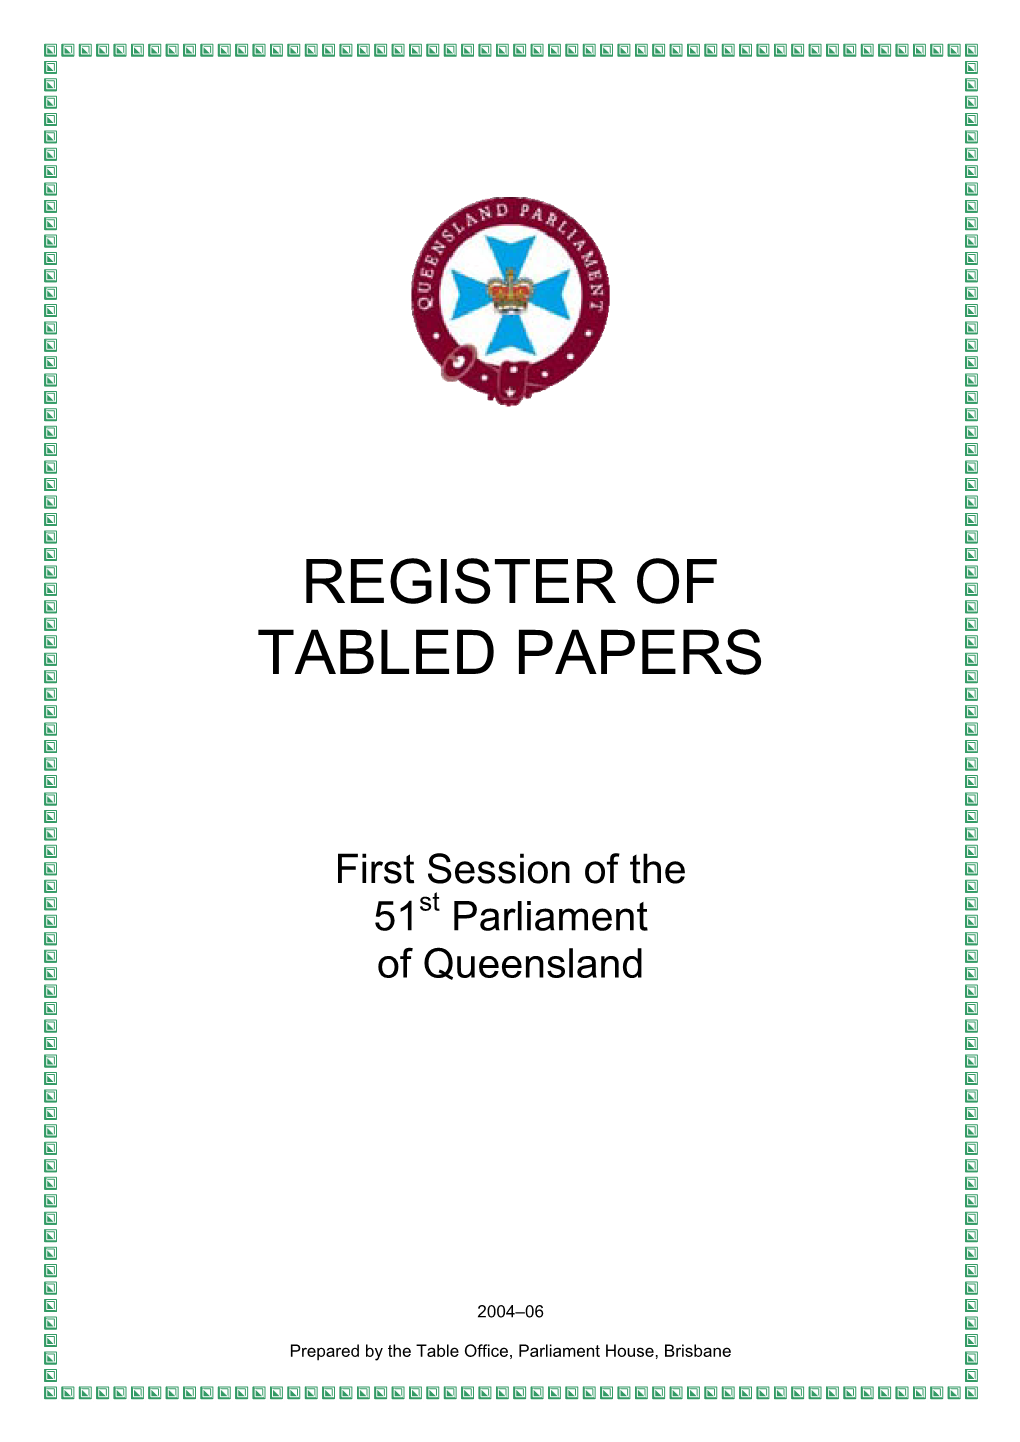 Register of Tabled Papers 51St Parliament